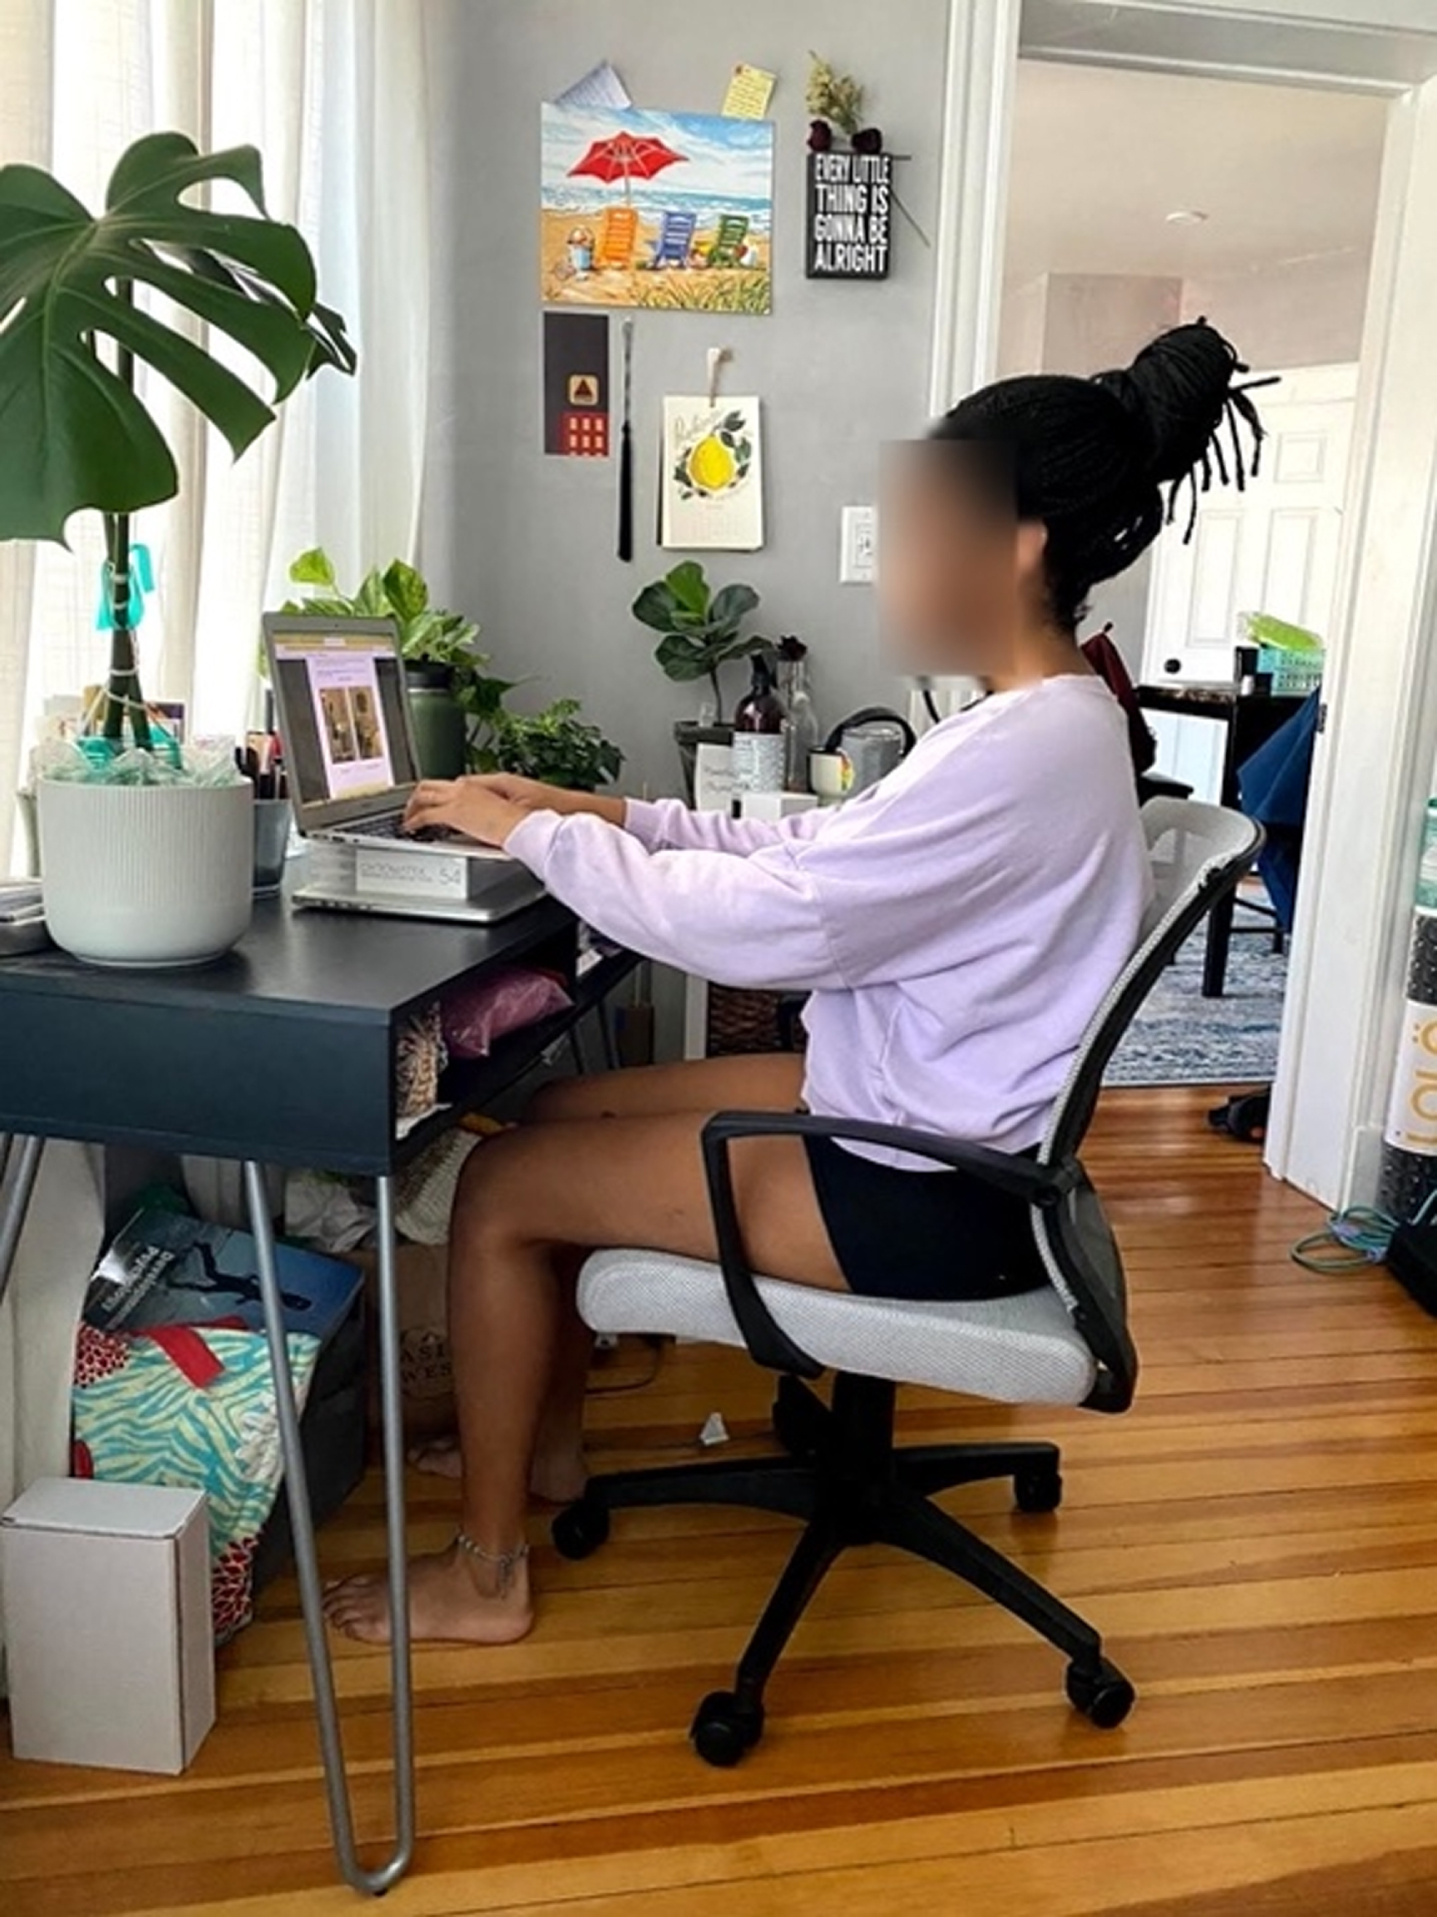 Participant at final workstation. Example of a participant completely changing their workstation location from a family home to an apartment, resulting in many changes including a lumbar supportive chair, armrests, and laptop height, while making potentially unproductive changes such as facing a window.